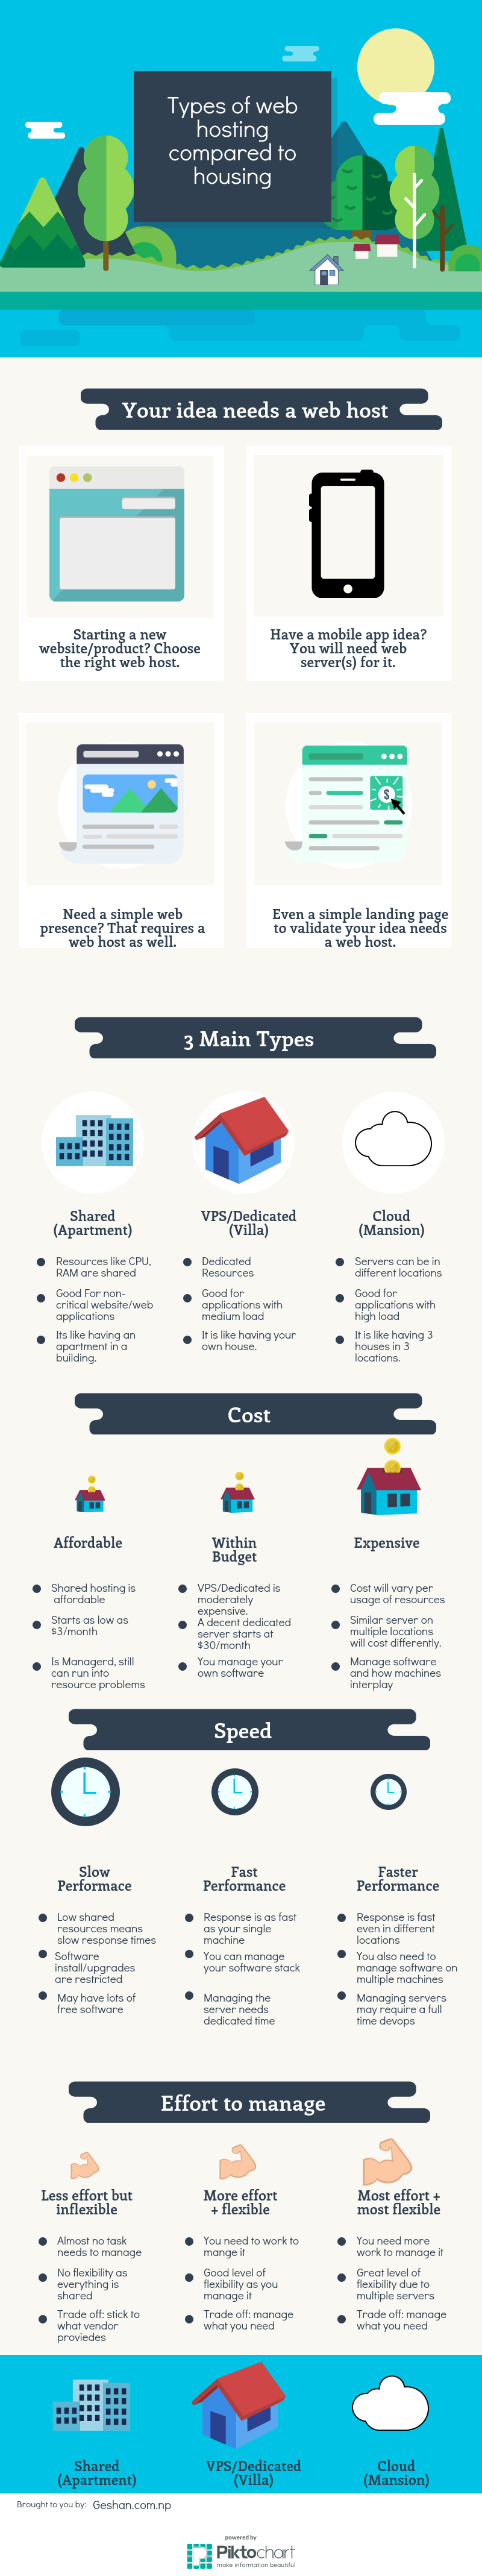 Different types of web hosting compared to types of housing